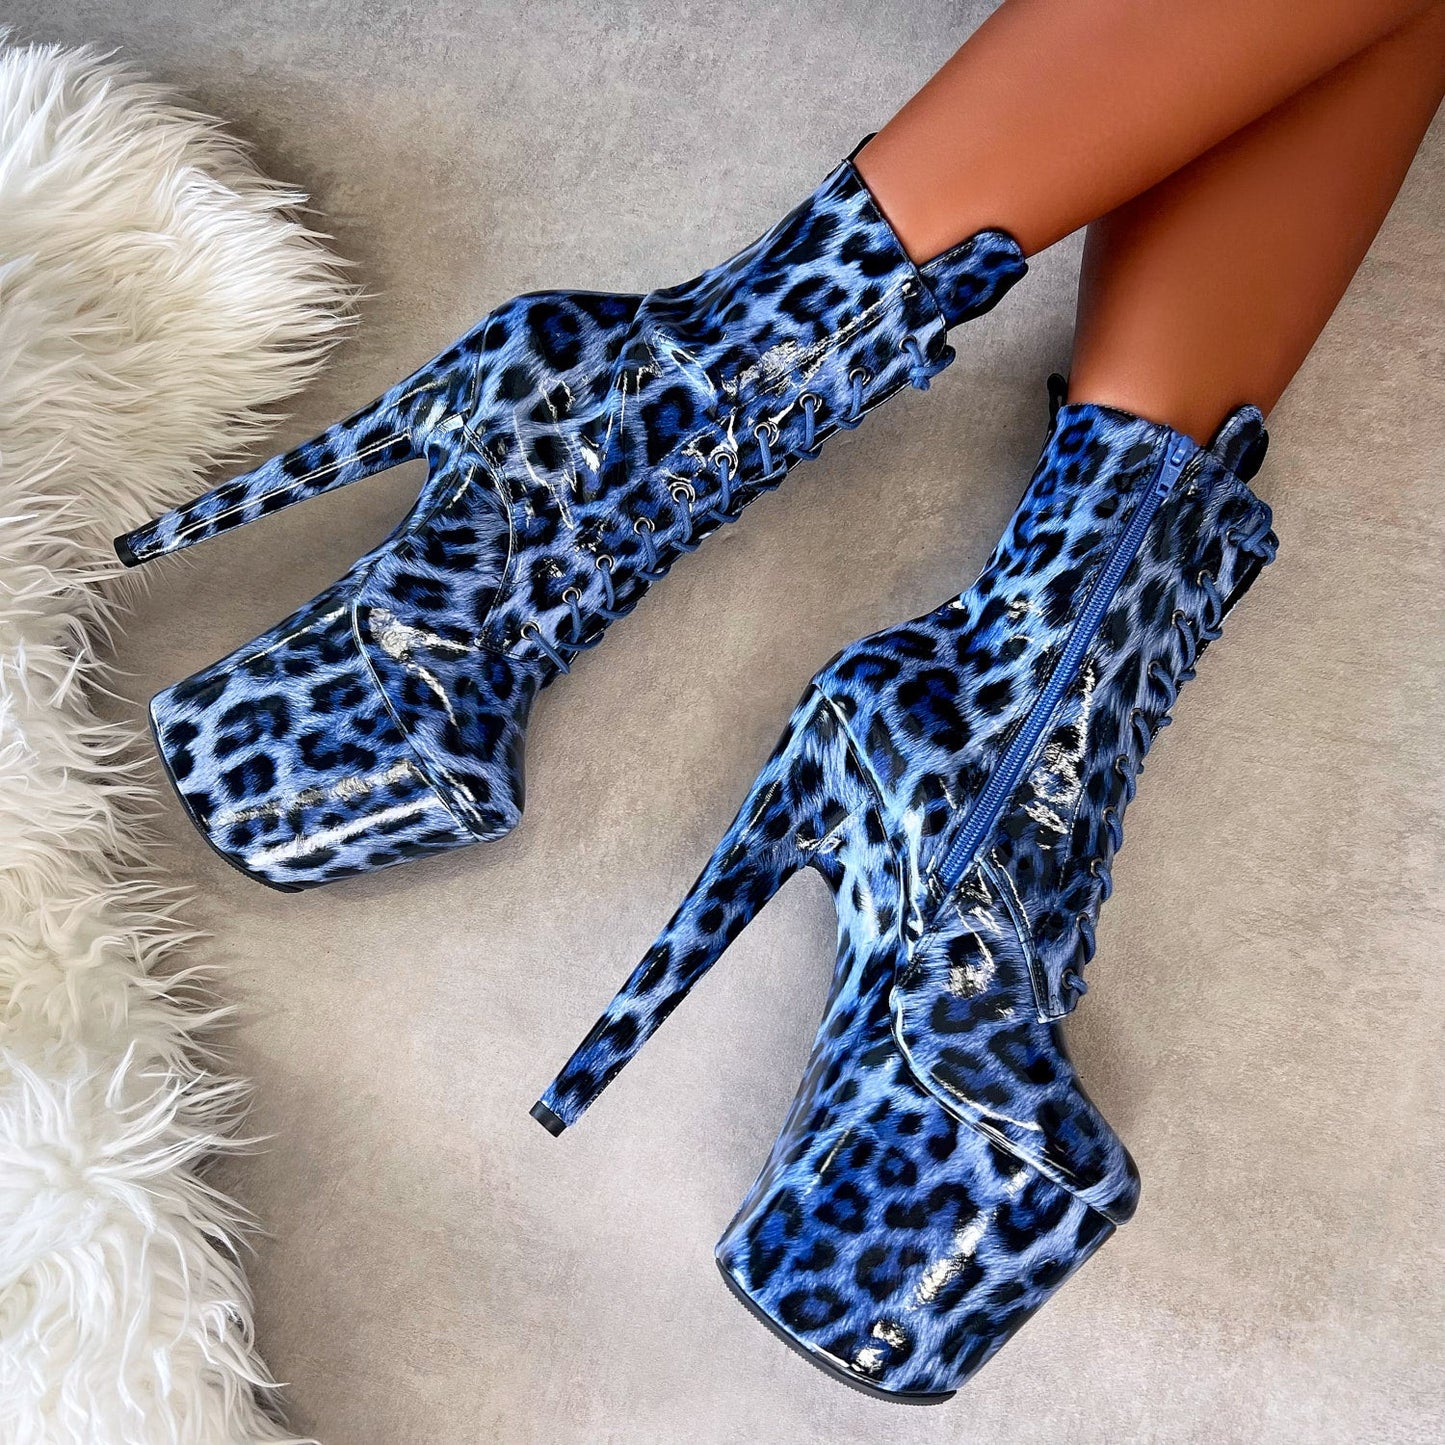 Blue Leopard Boot - 8 INCH